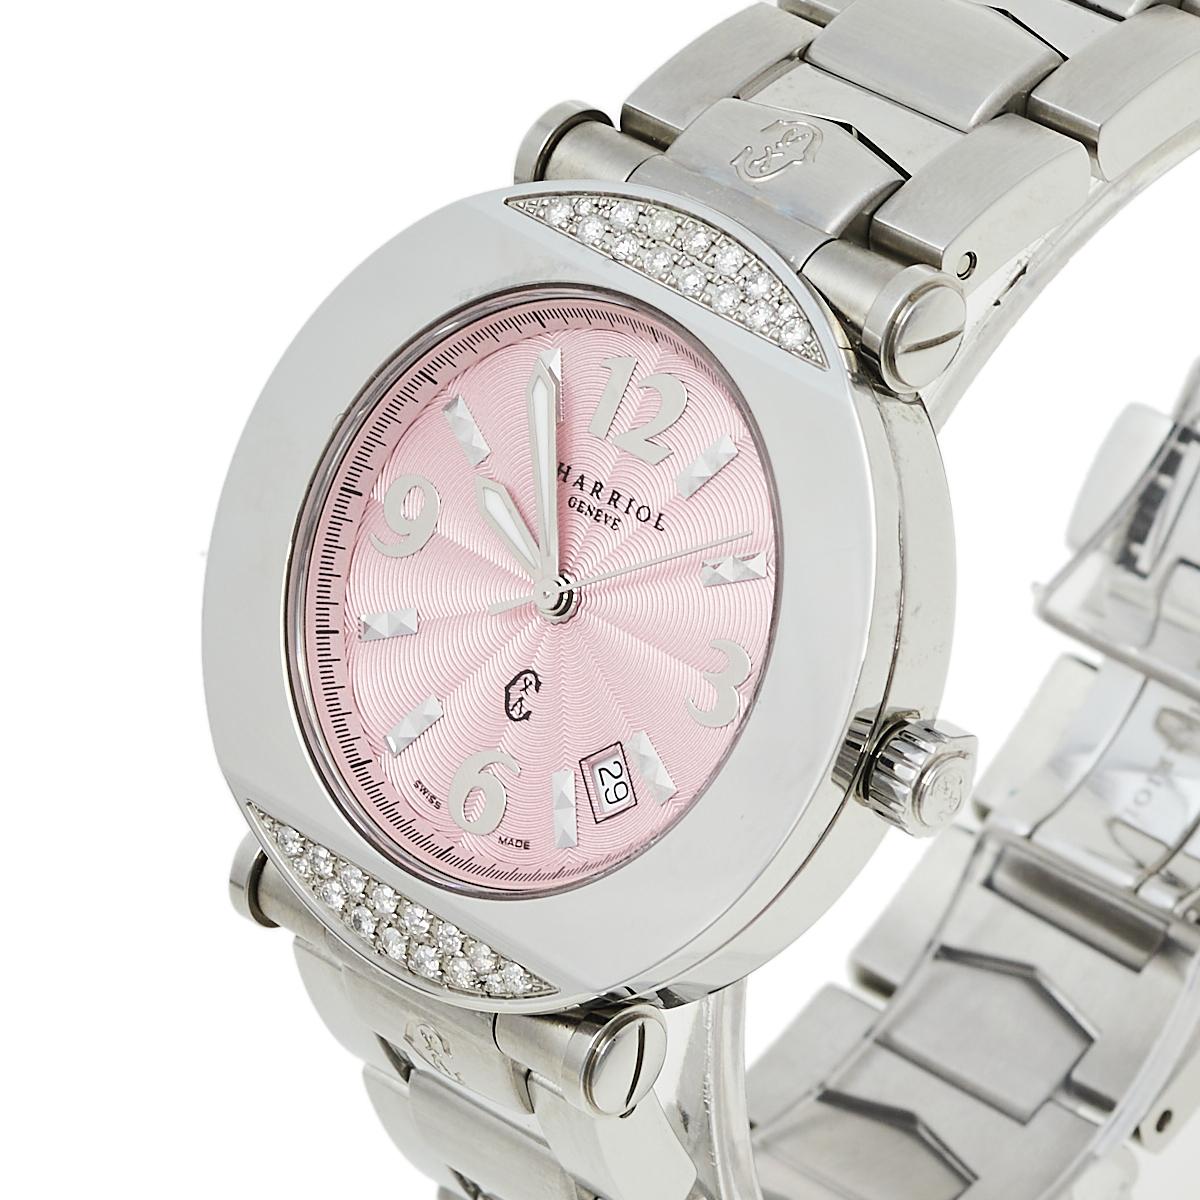 Ready to adorn your wrist with luxury is this Charriol Colvmbvs quartz wristwatch. It exhibits a round case in a 38 mm diameter and a pink dial featuring elegant markers and a date window. Diamonds on the bezel add just the right sparkle to this